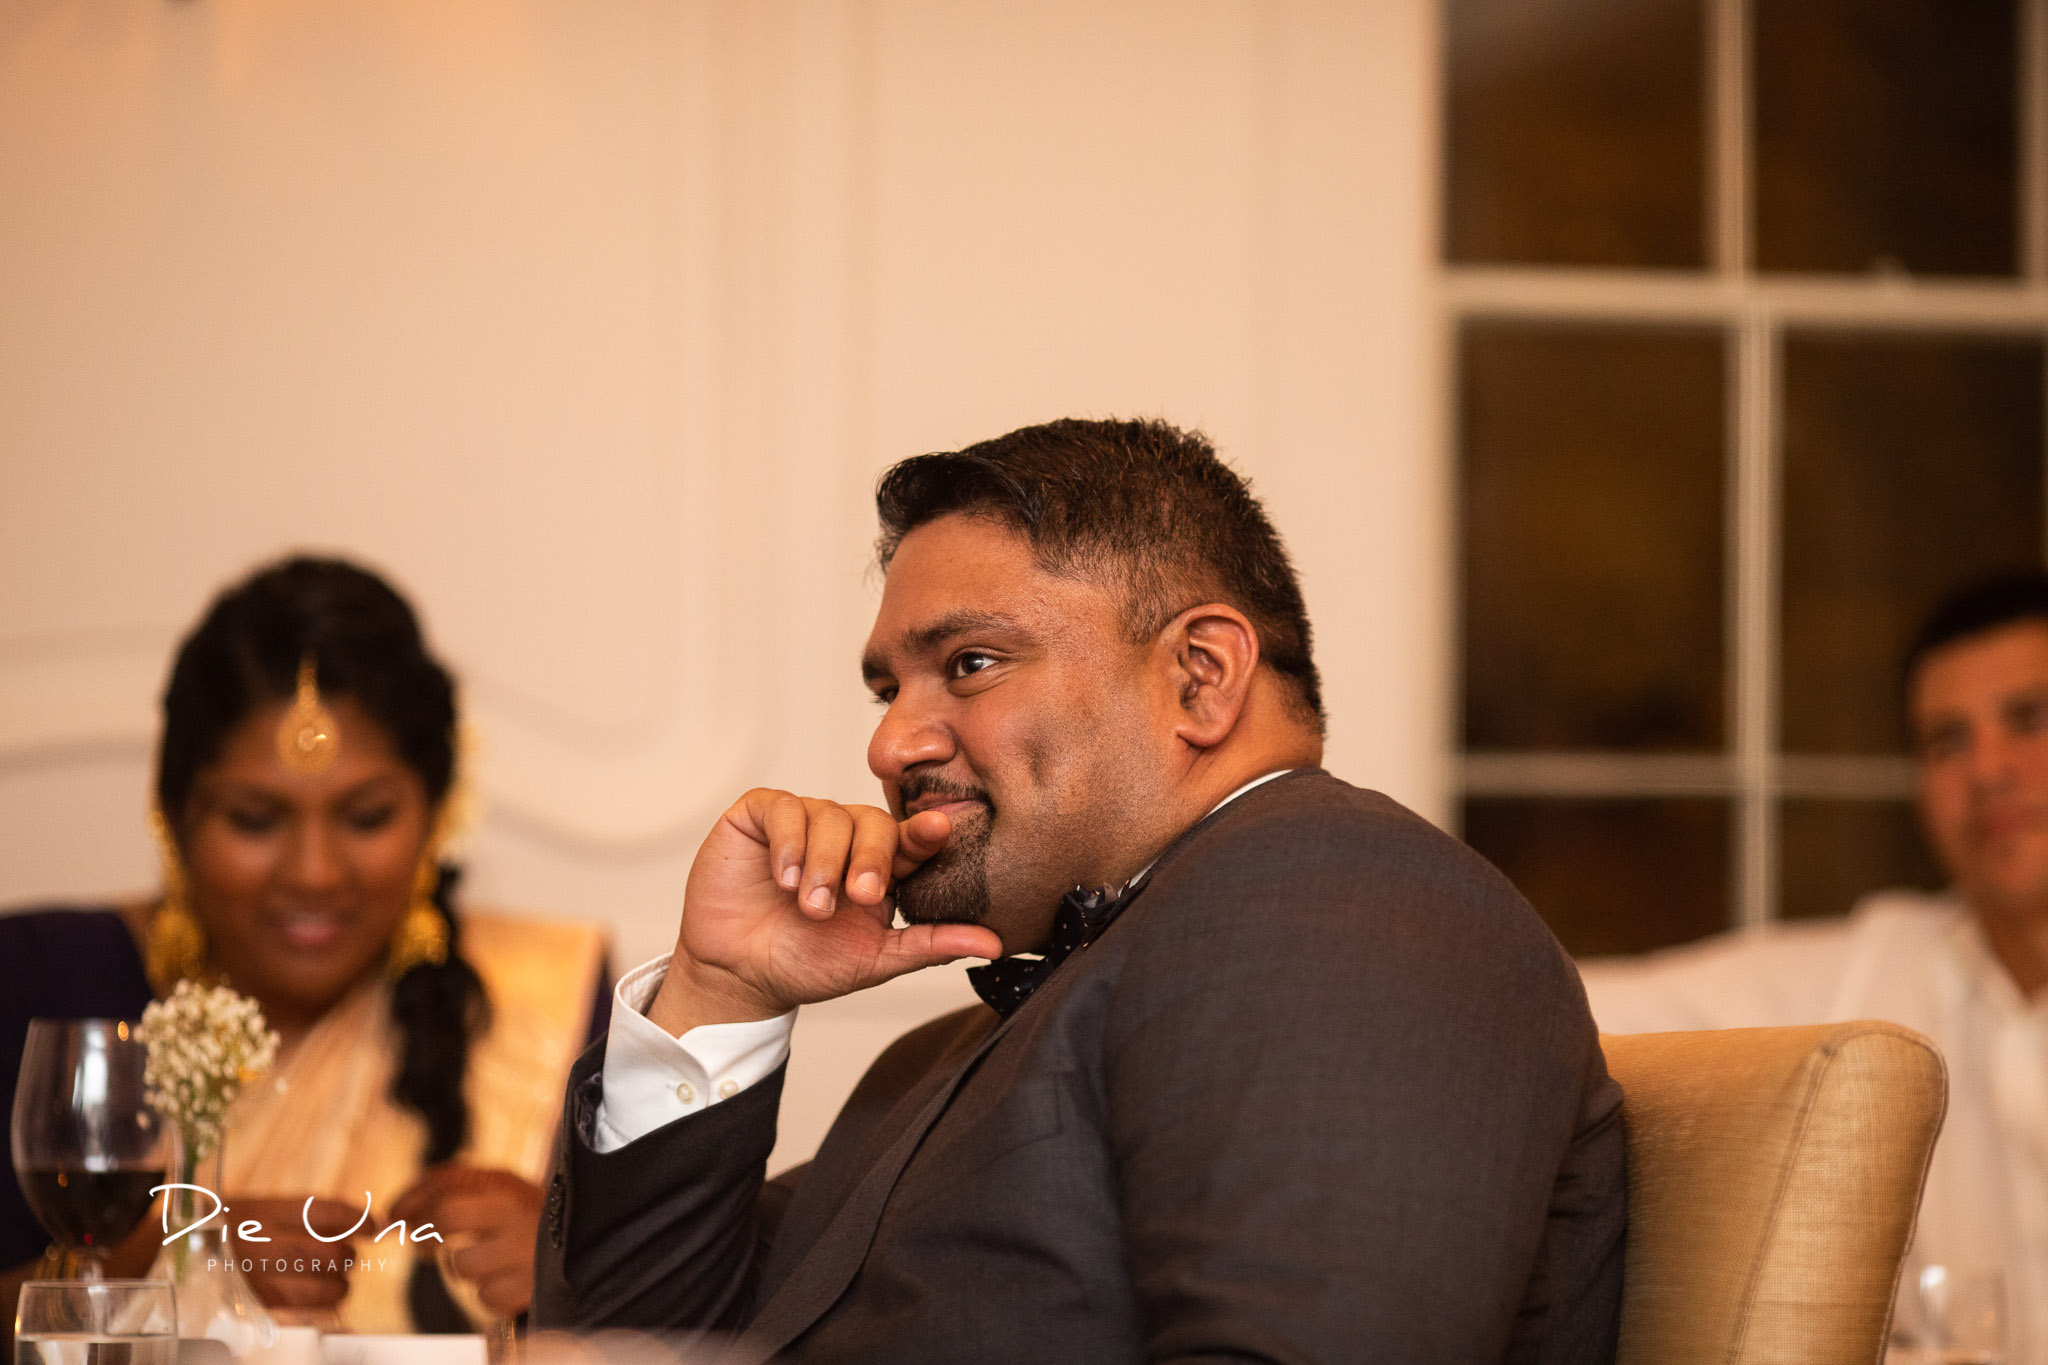 best man with a thoughtful look on his face during speeches.jpg